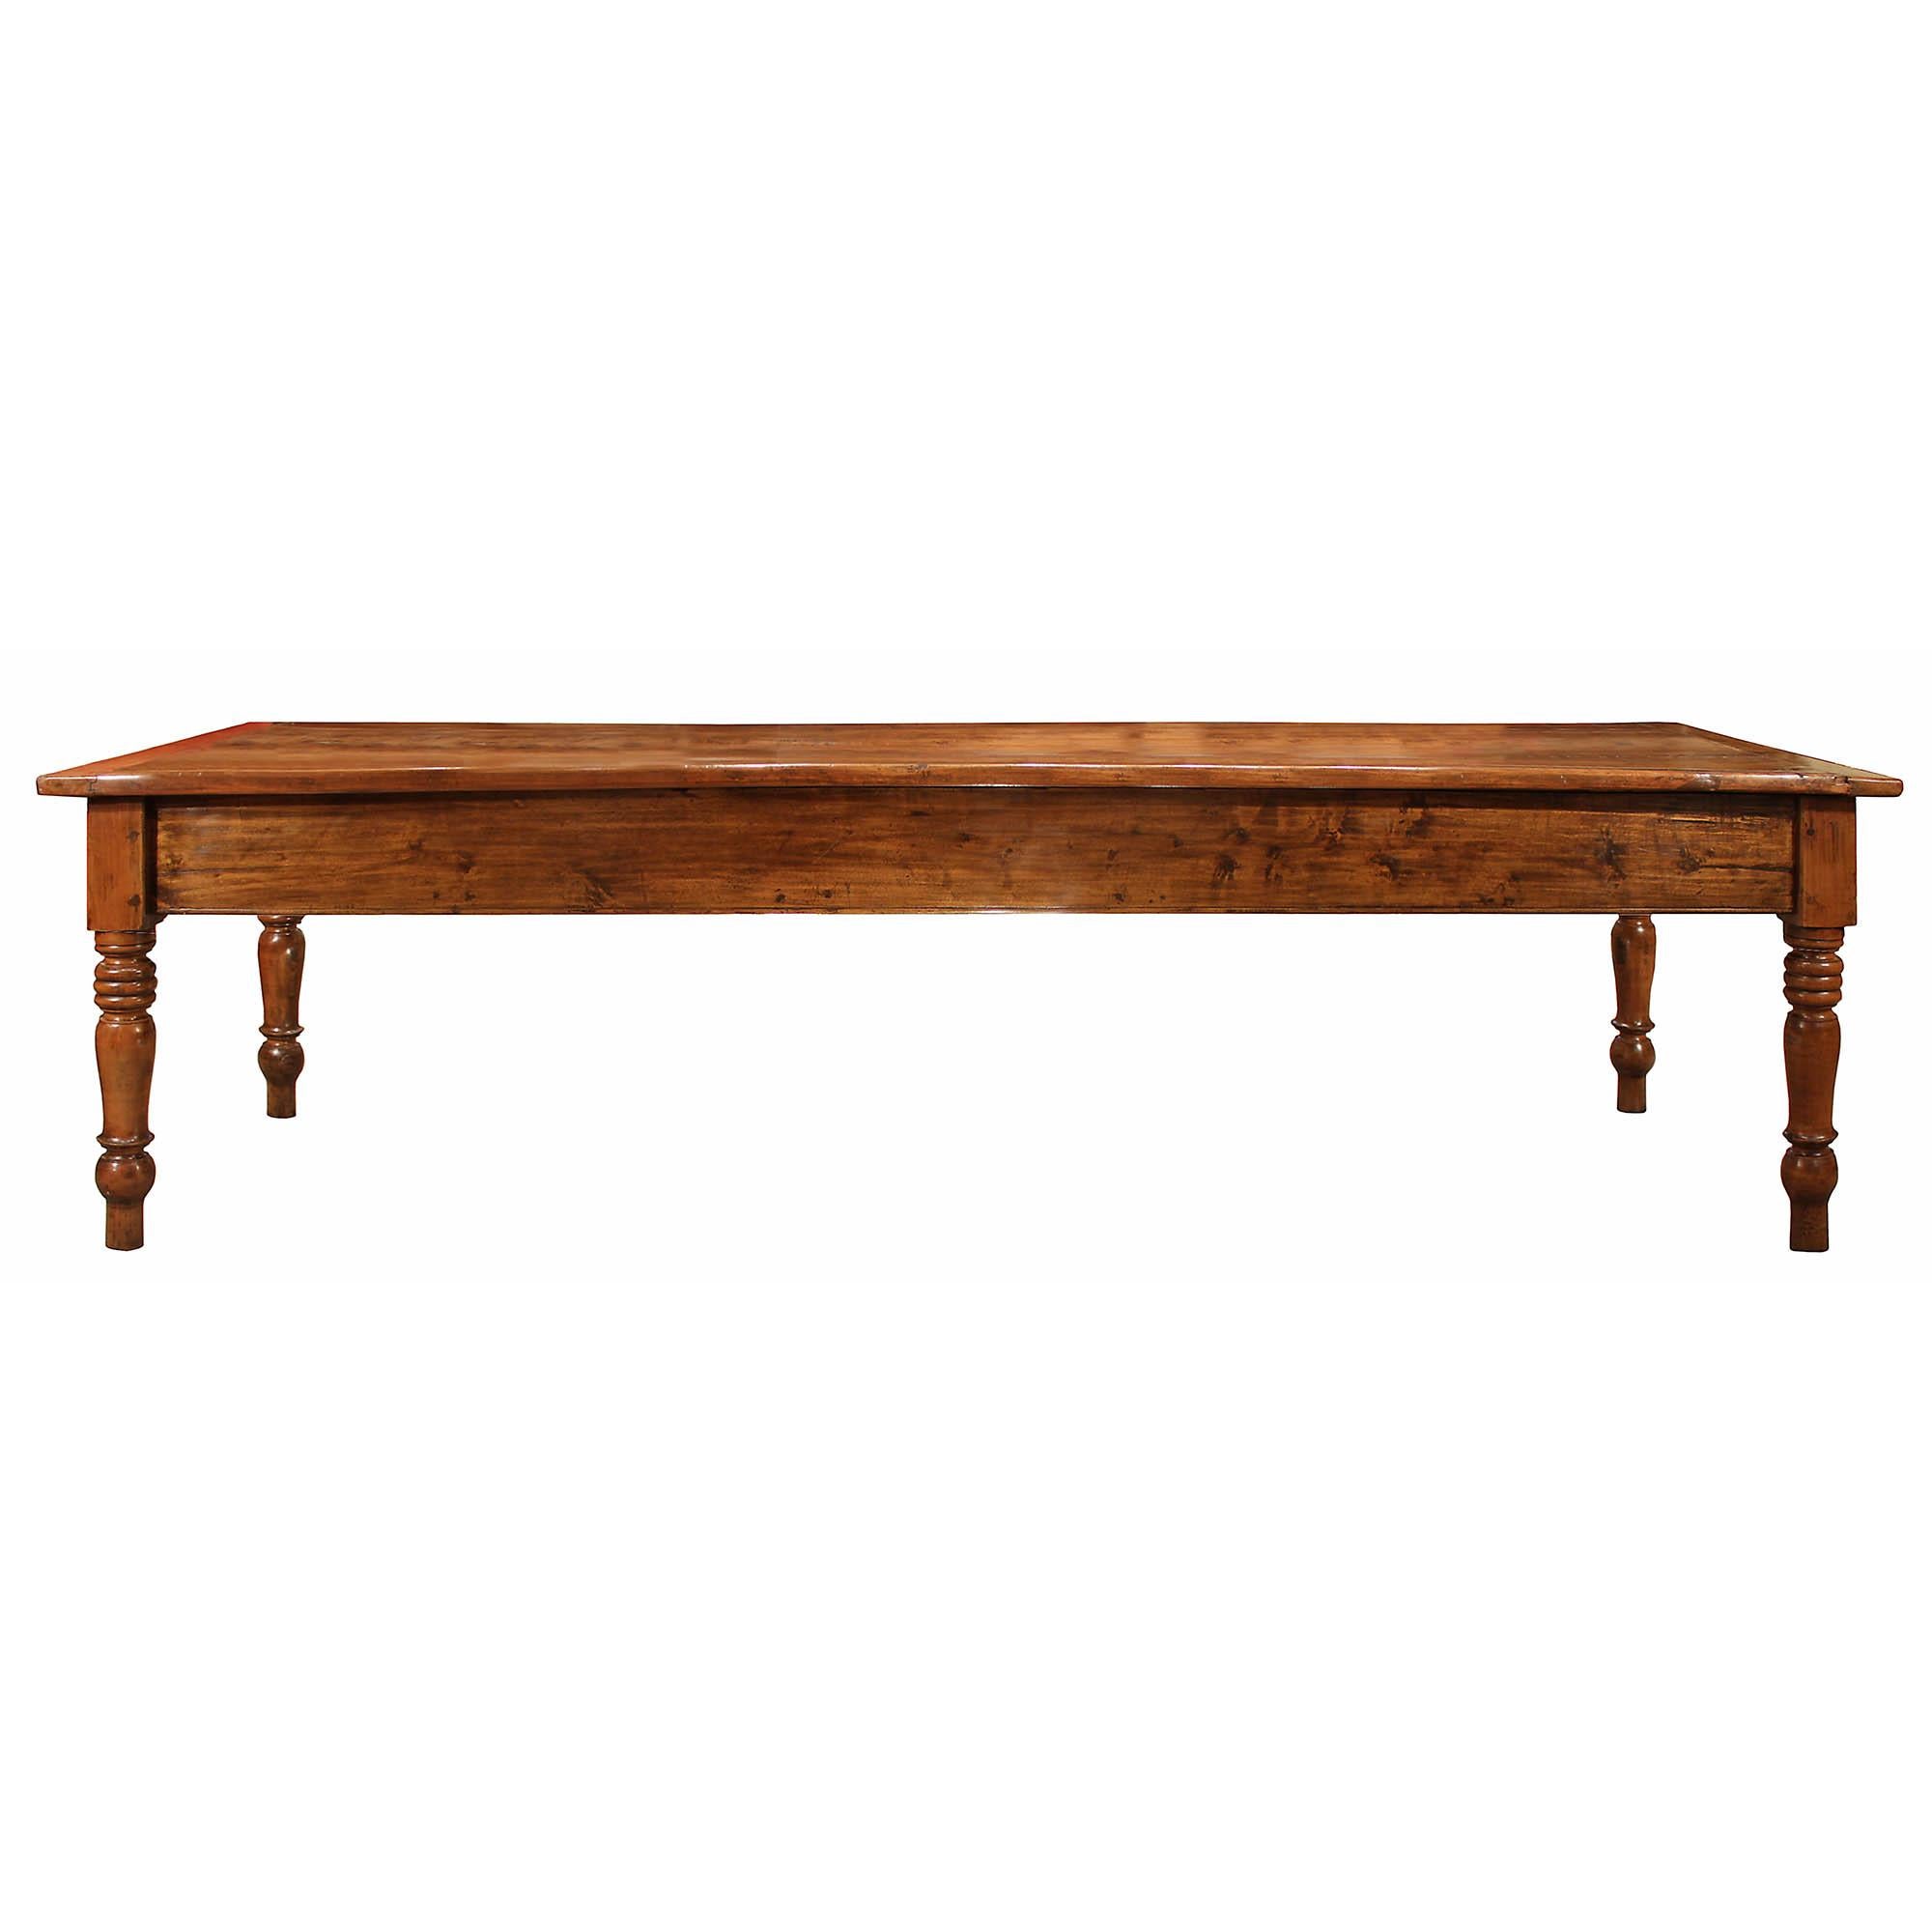 Italian 18th Century Walnut Country Table In Good Condition For Sale In West Palm Beach, FL